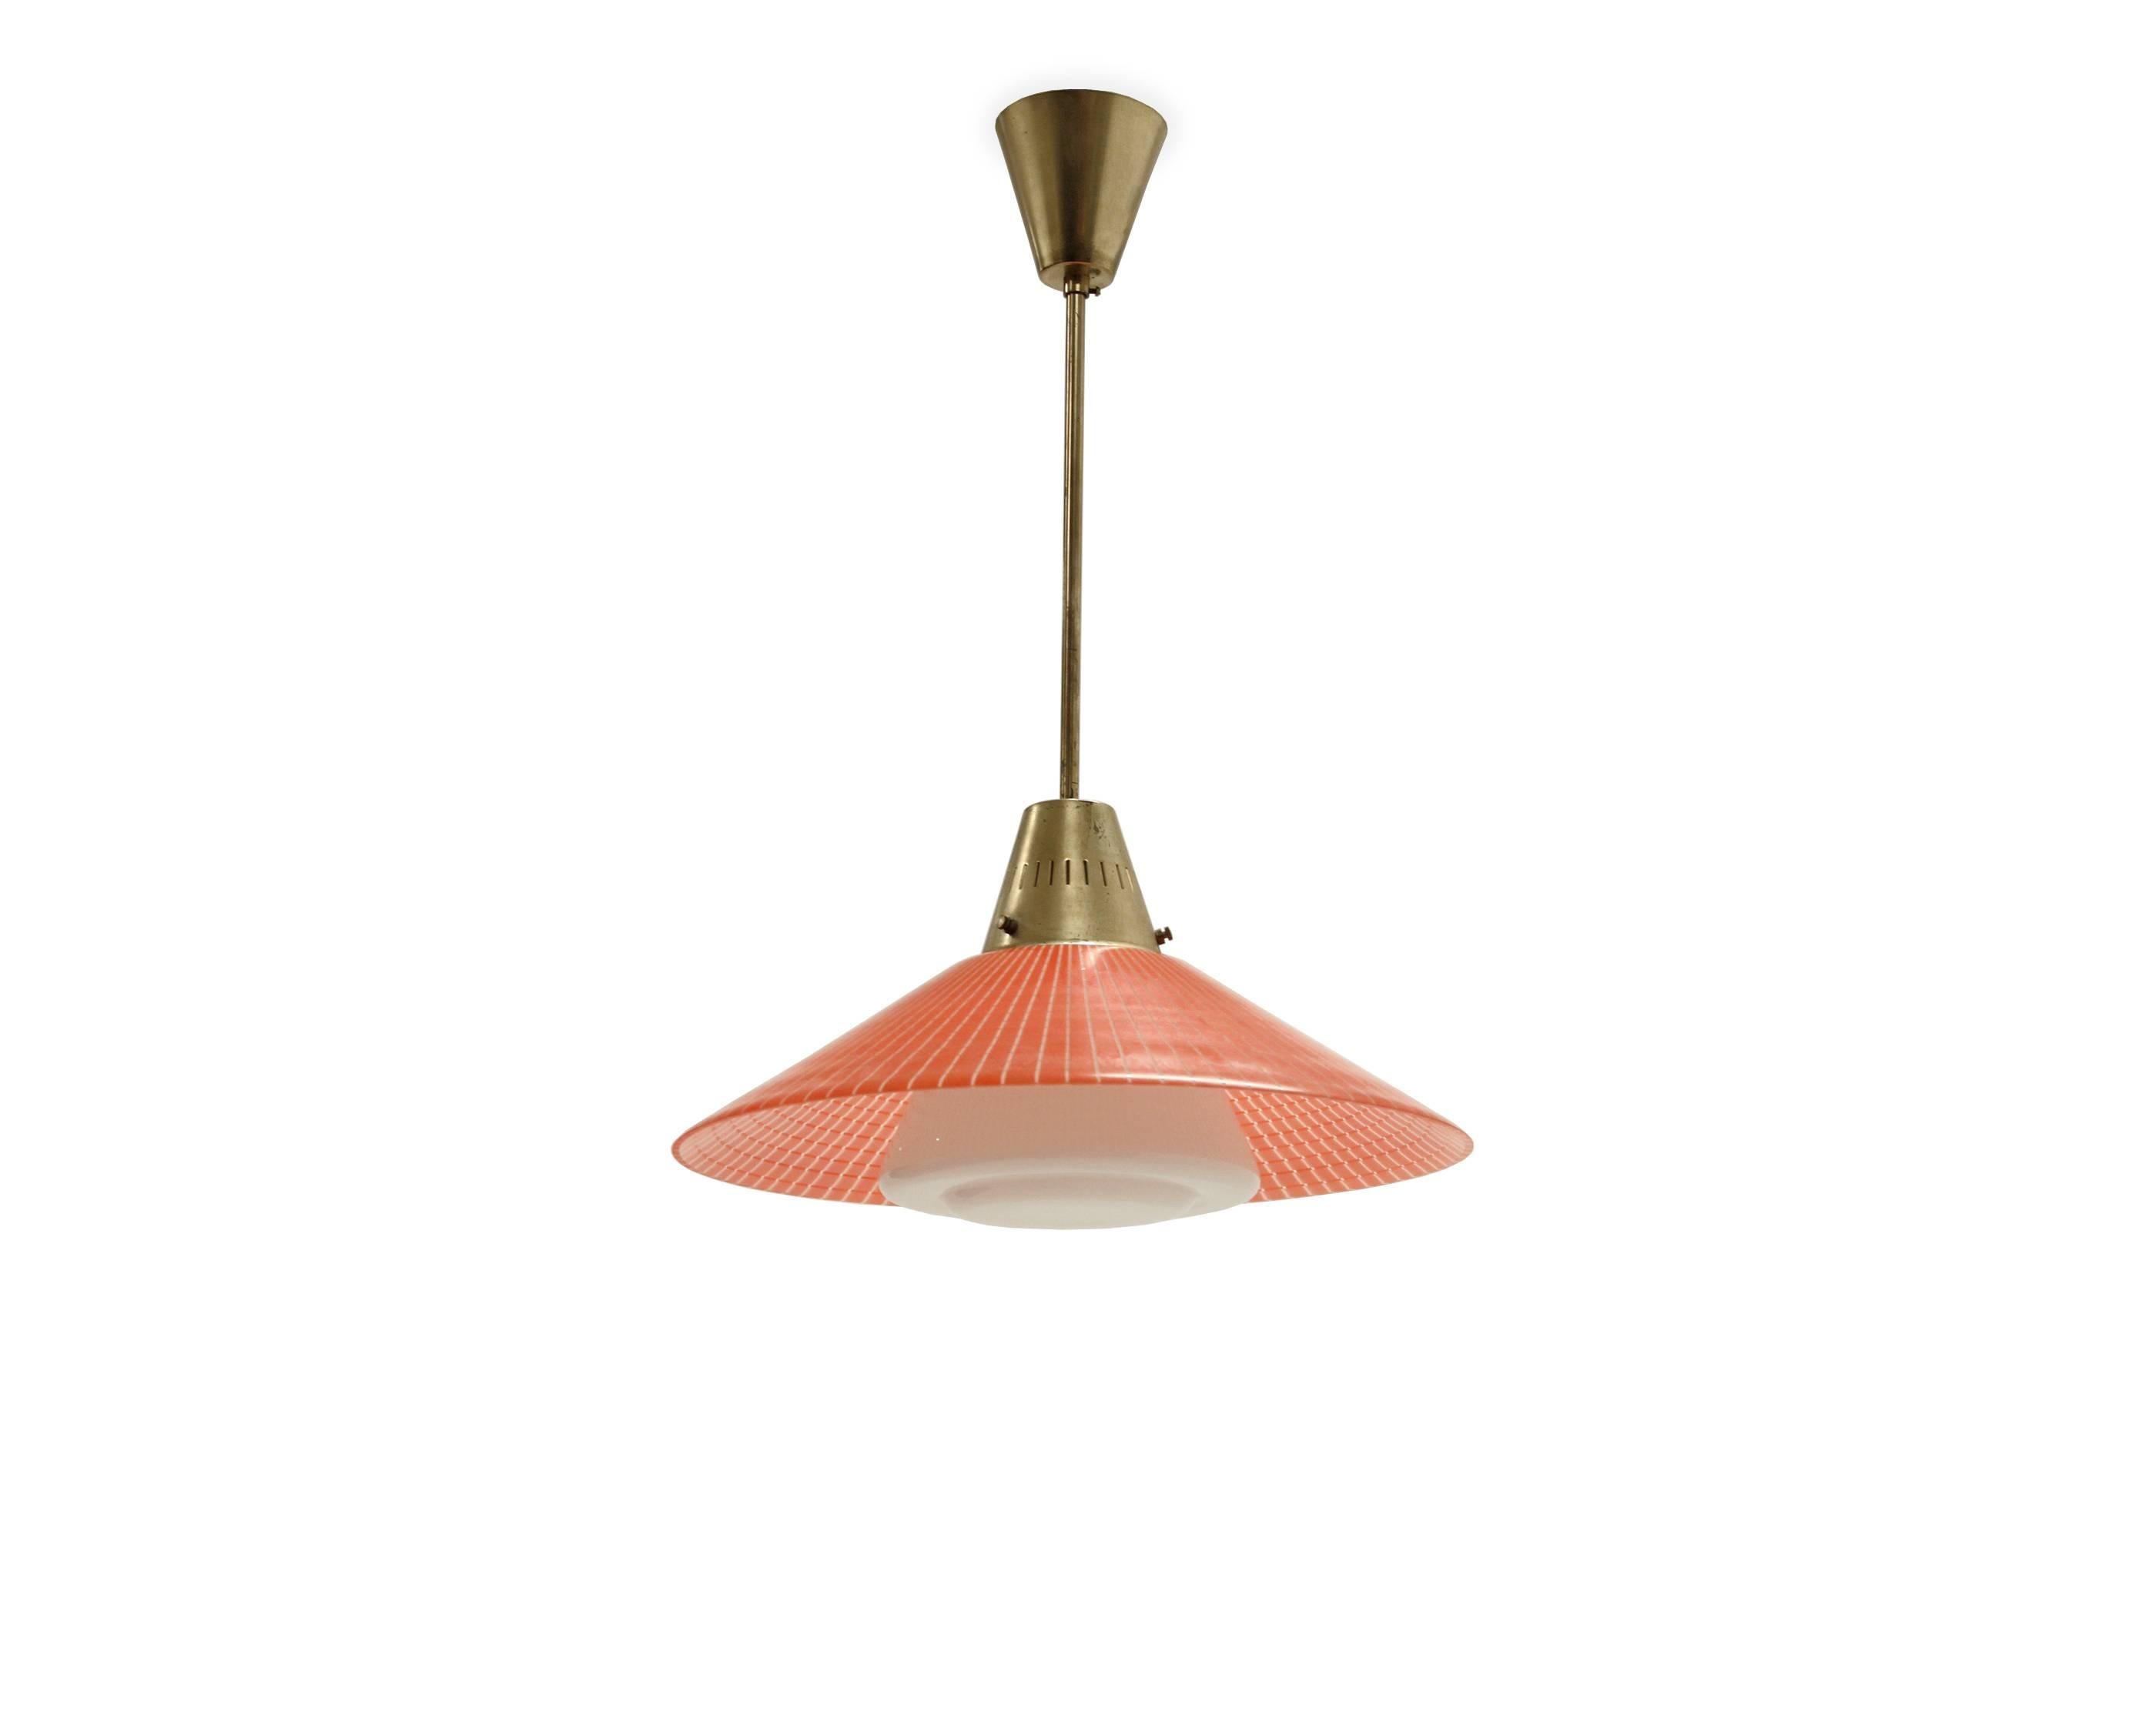 Wonderful and well-made ceiling light on a brass frame, surface decorated glass shade, and opaline glass cupola. Designed and made in Norway by Tr & Co (T. Røste), circa 1960s second half. The lamp is fully working and in very vintage condition. The